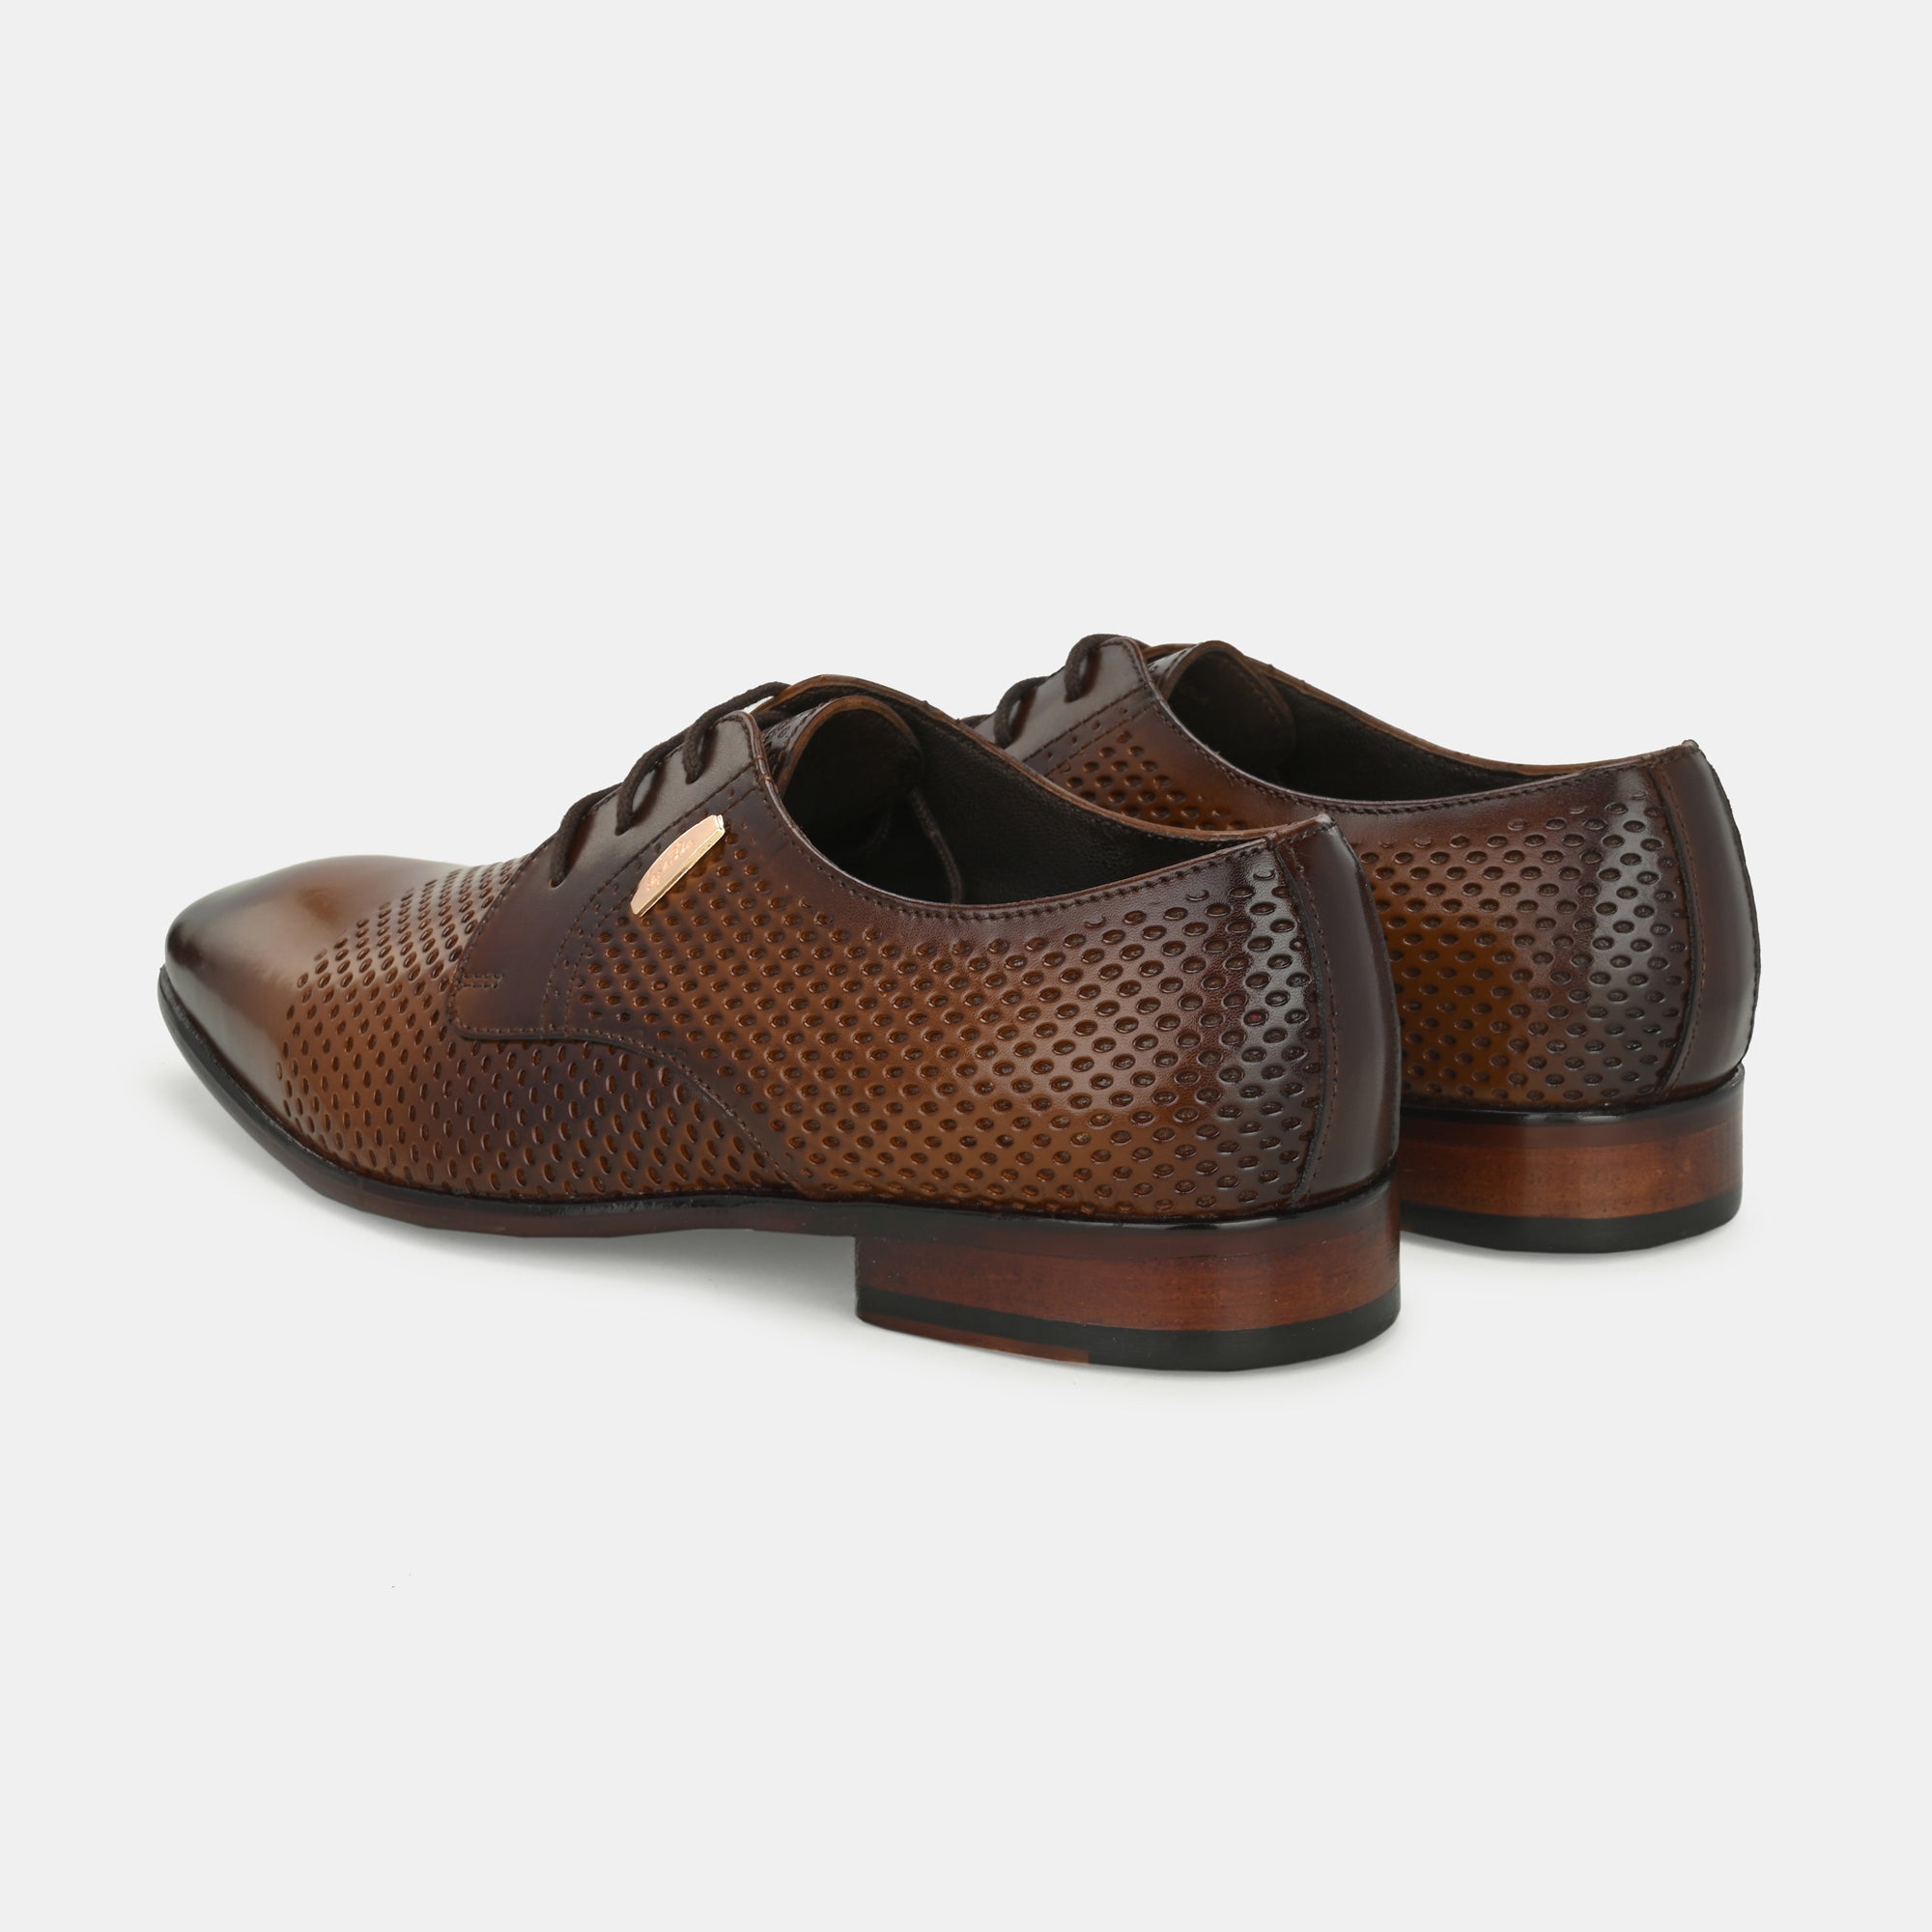 Tan Perforated Lace-Up Shoes by Lafattio